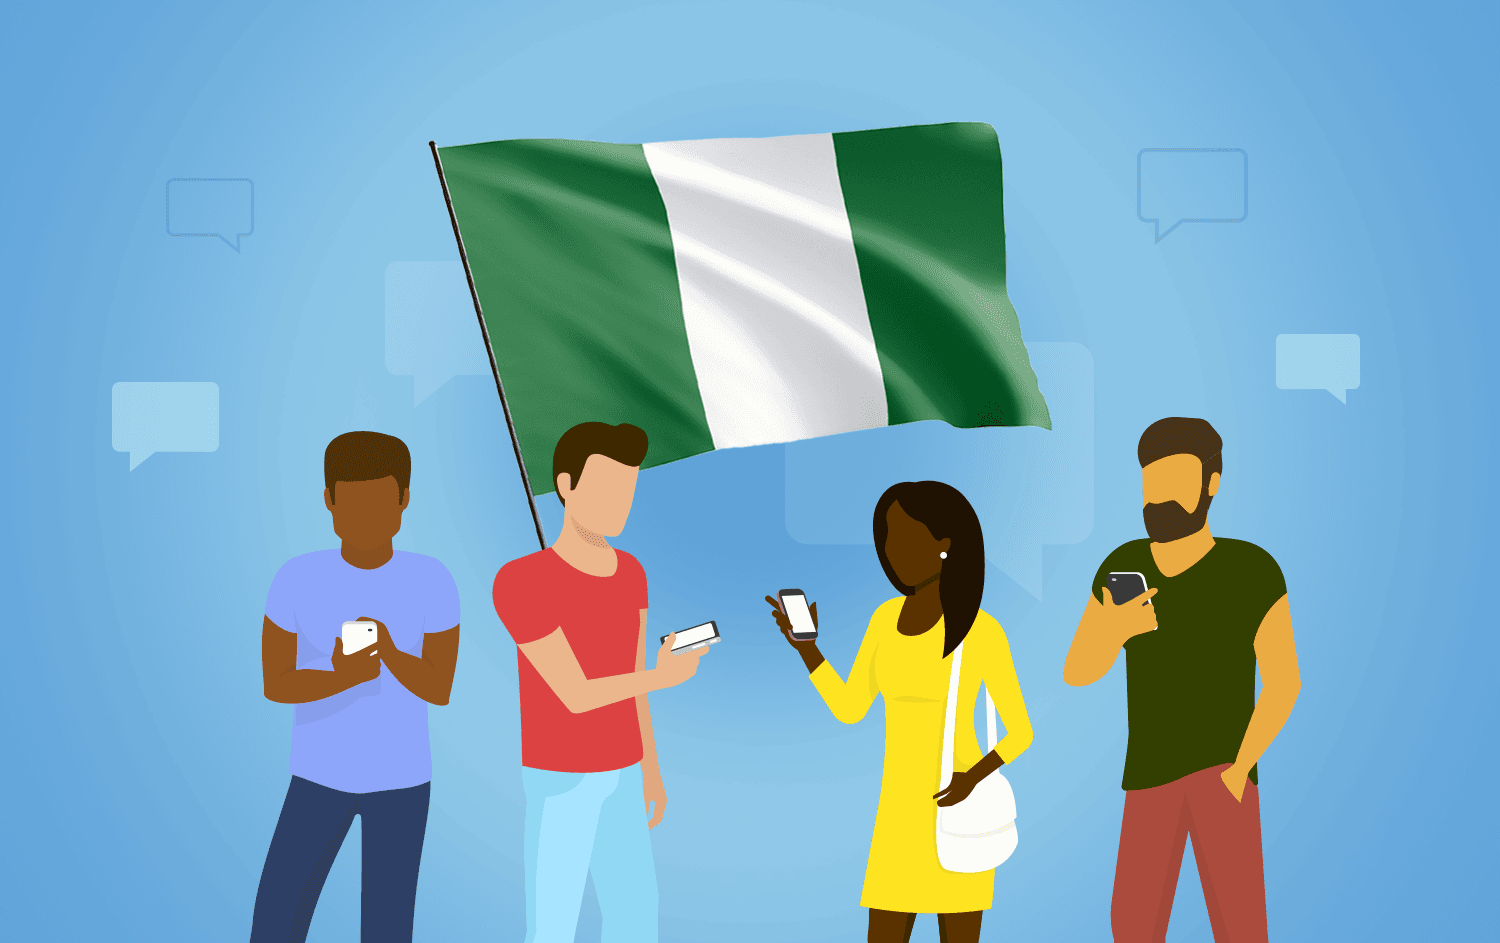 Cartoon representation of people texting with Nigerian flag in background]